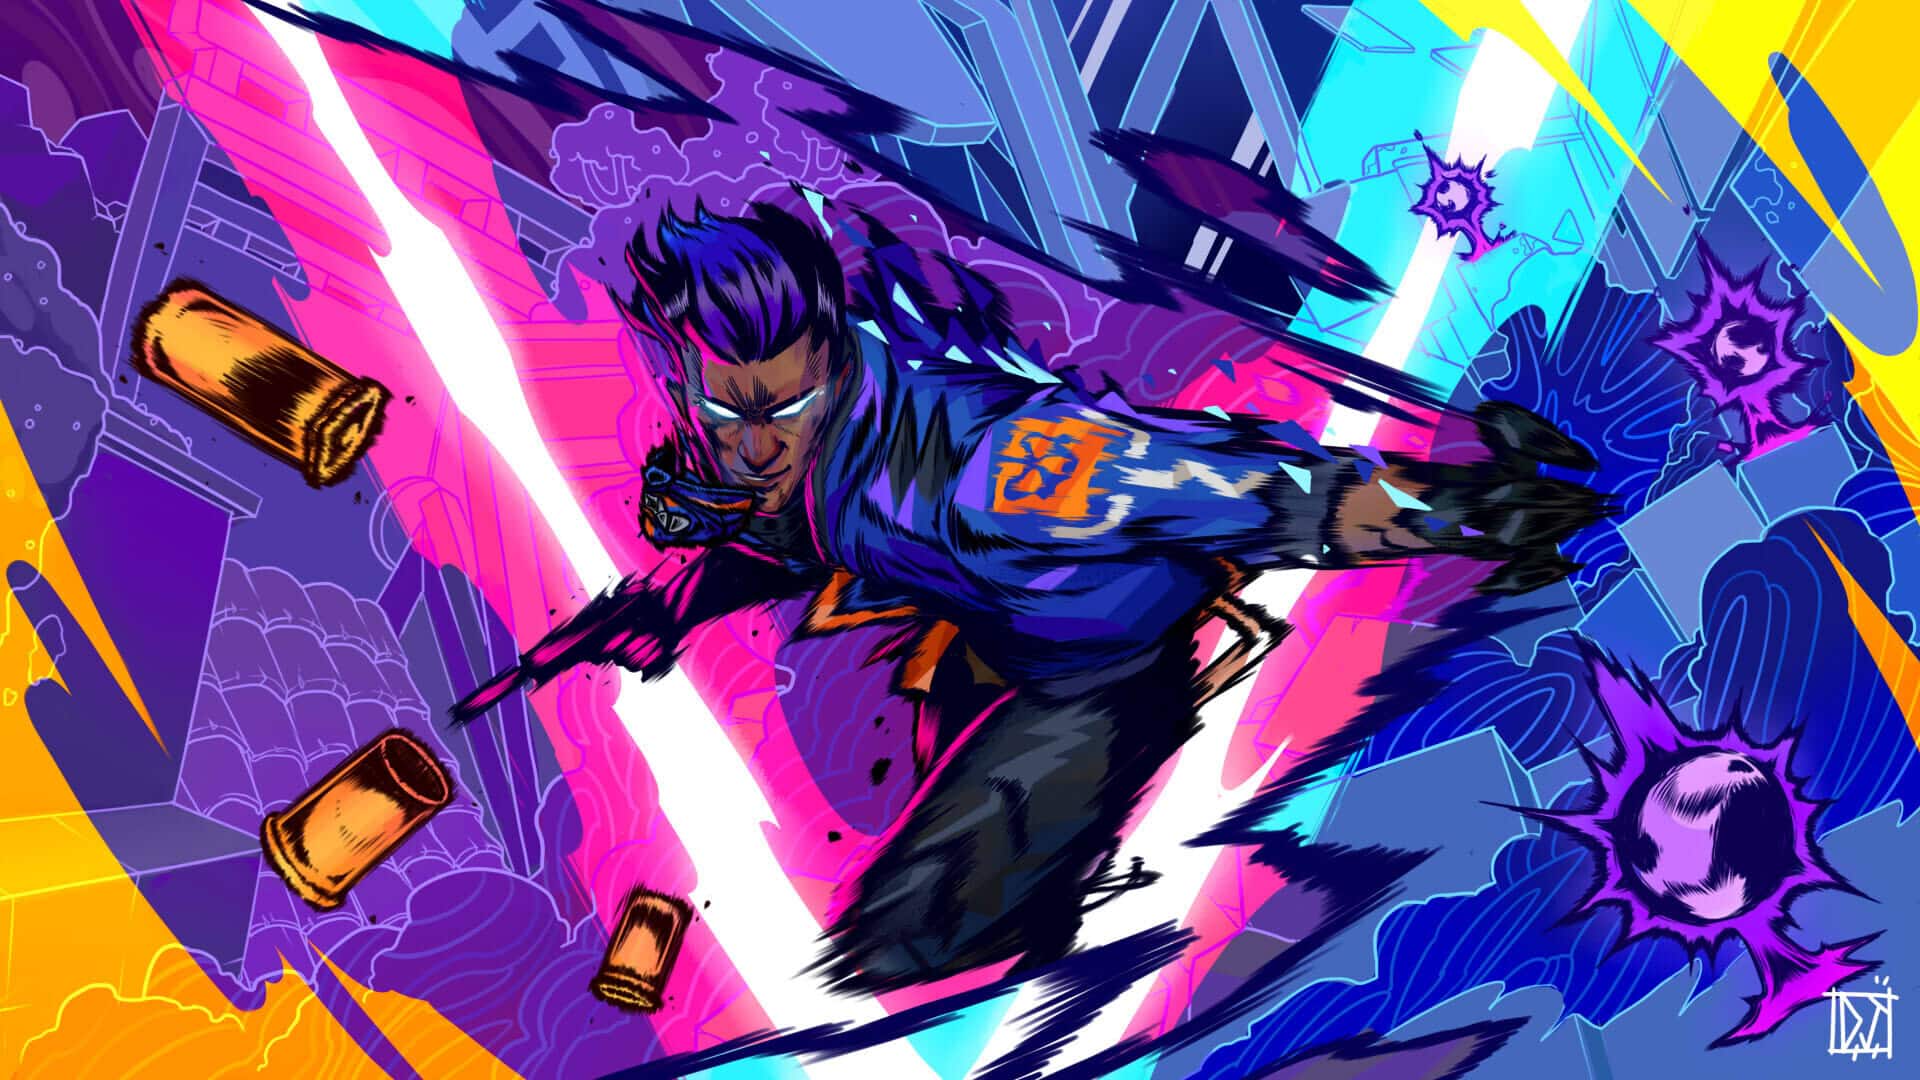 Image by Dominic Barrios – A colorful and vibrant image of Yoru using his abilities.